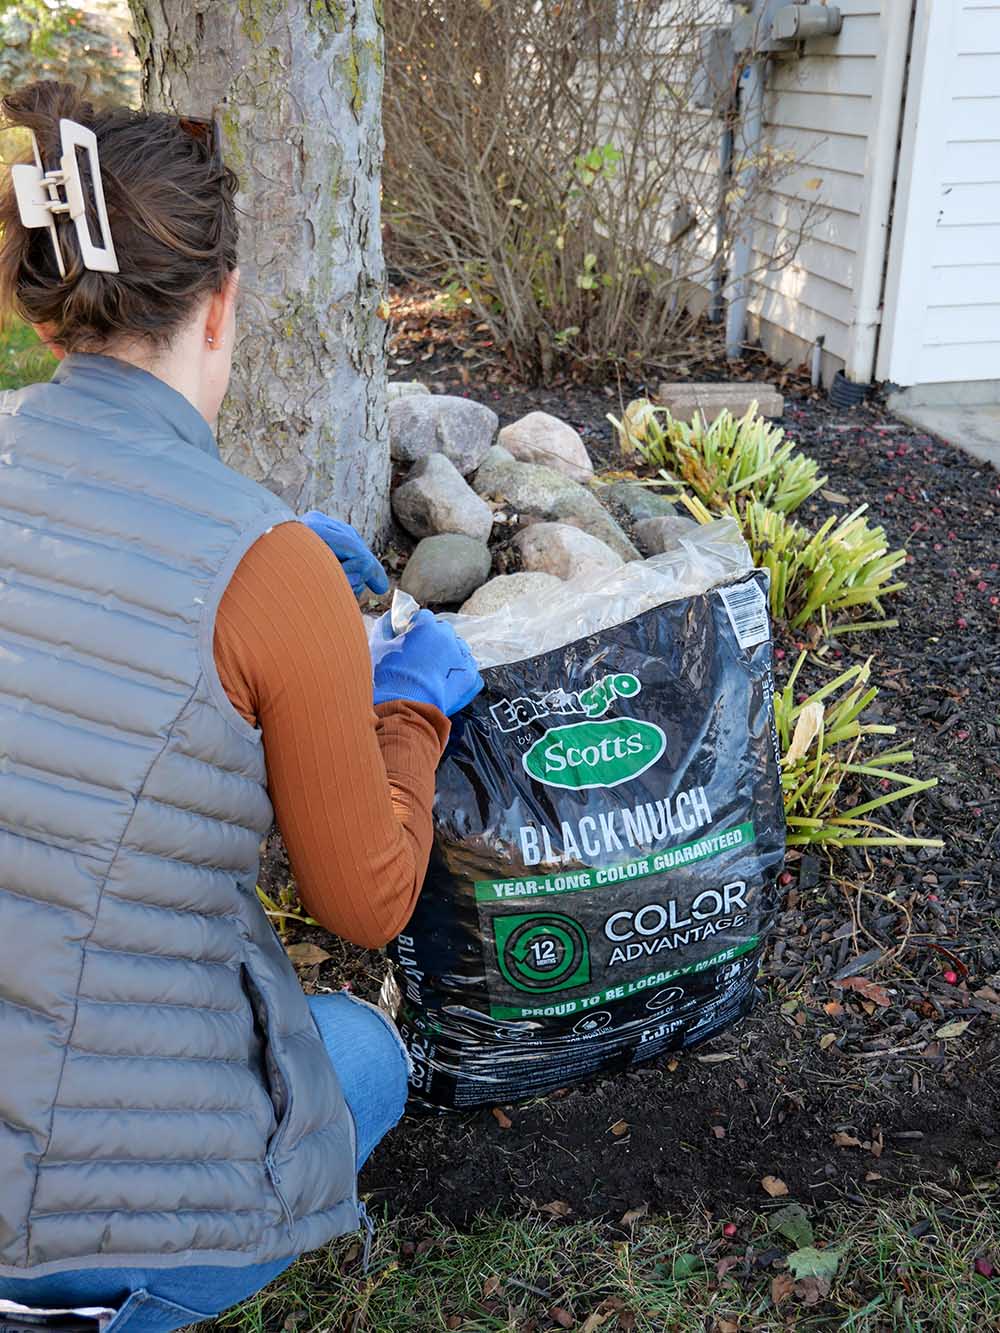 A woman opening a bag of mulch for her garden bed.